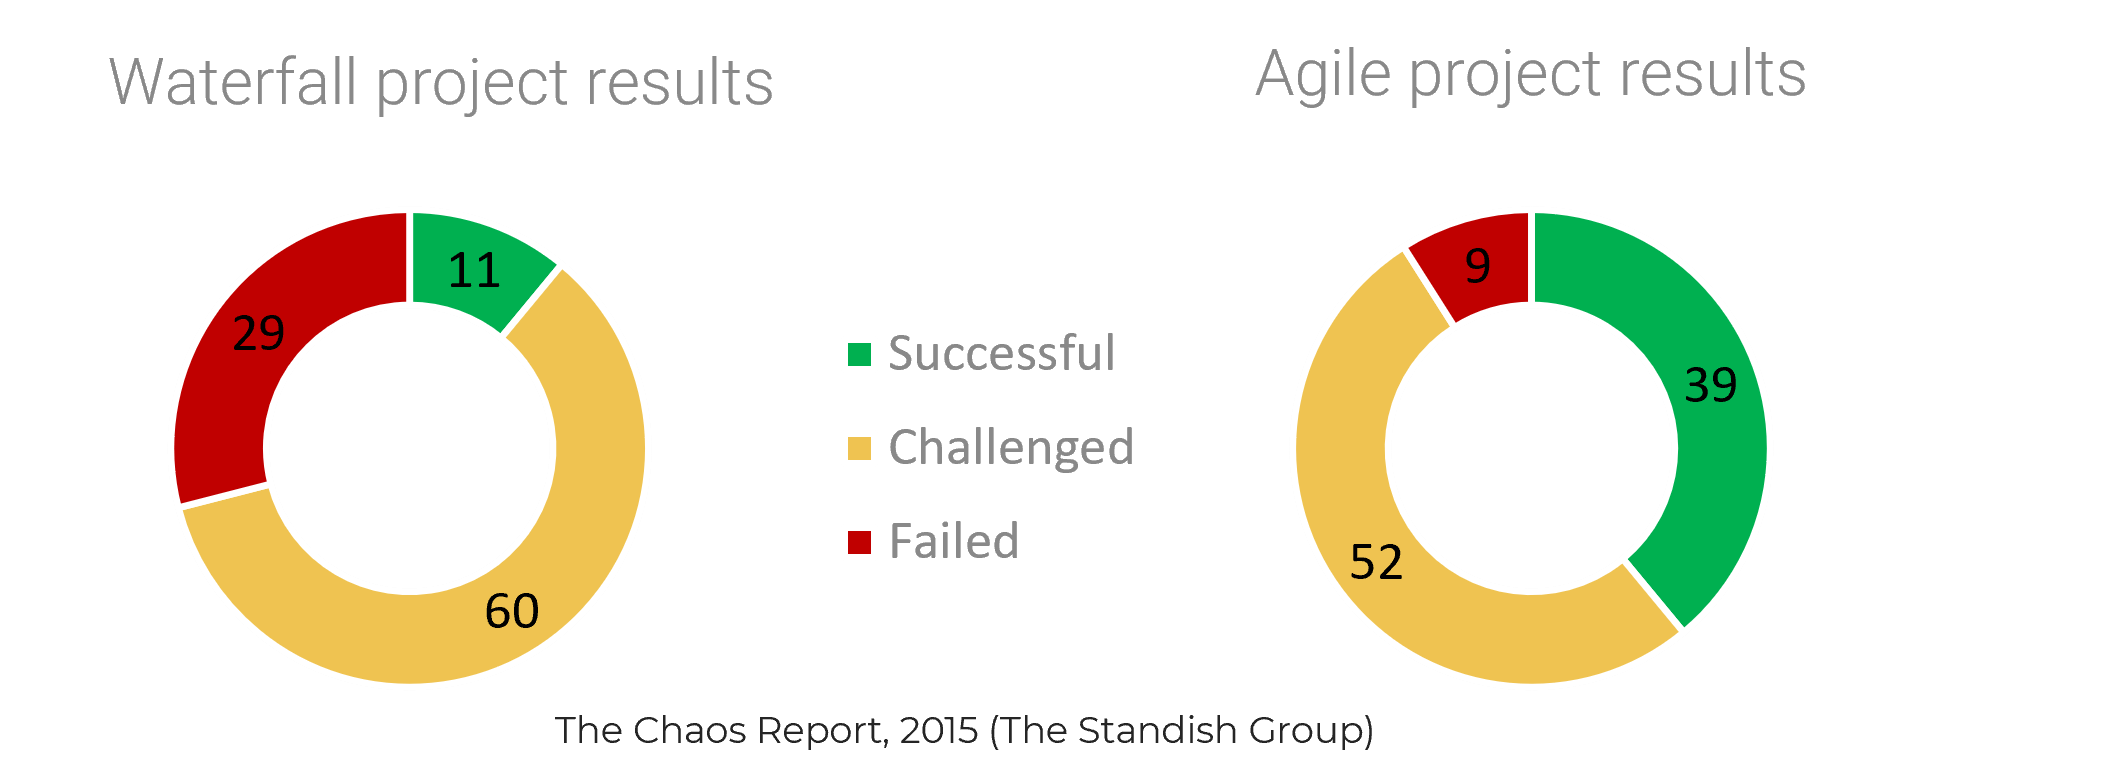 This is an image of the Waterfall Project Results, compared to Agile Product Results.